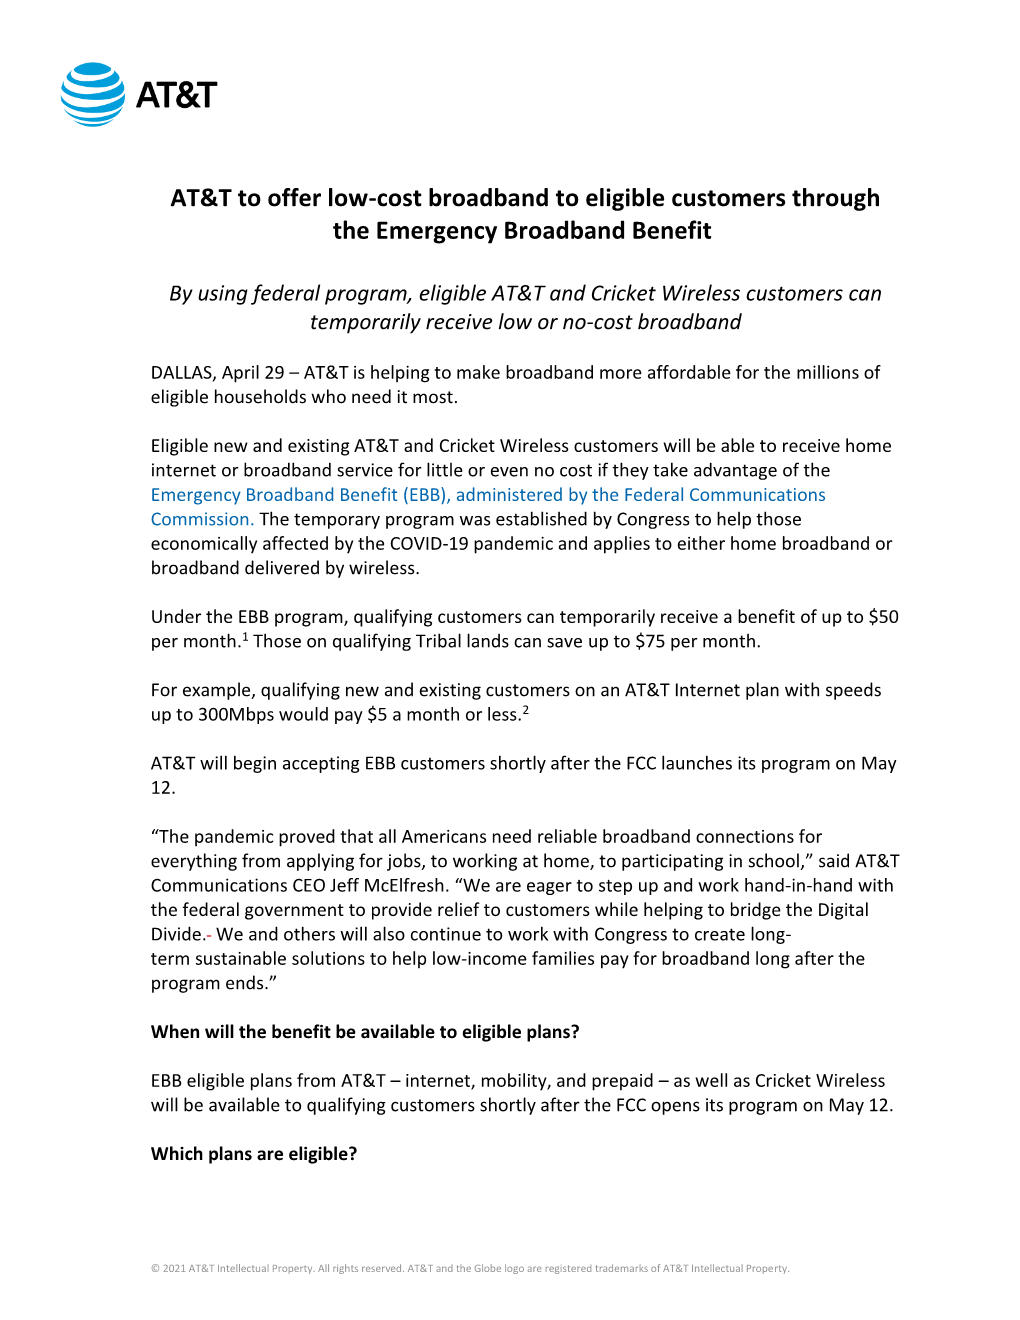 AT&T to Offer Low-Cost Broadband to Eligible Customers Through The